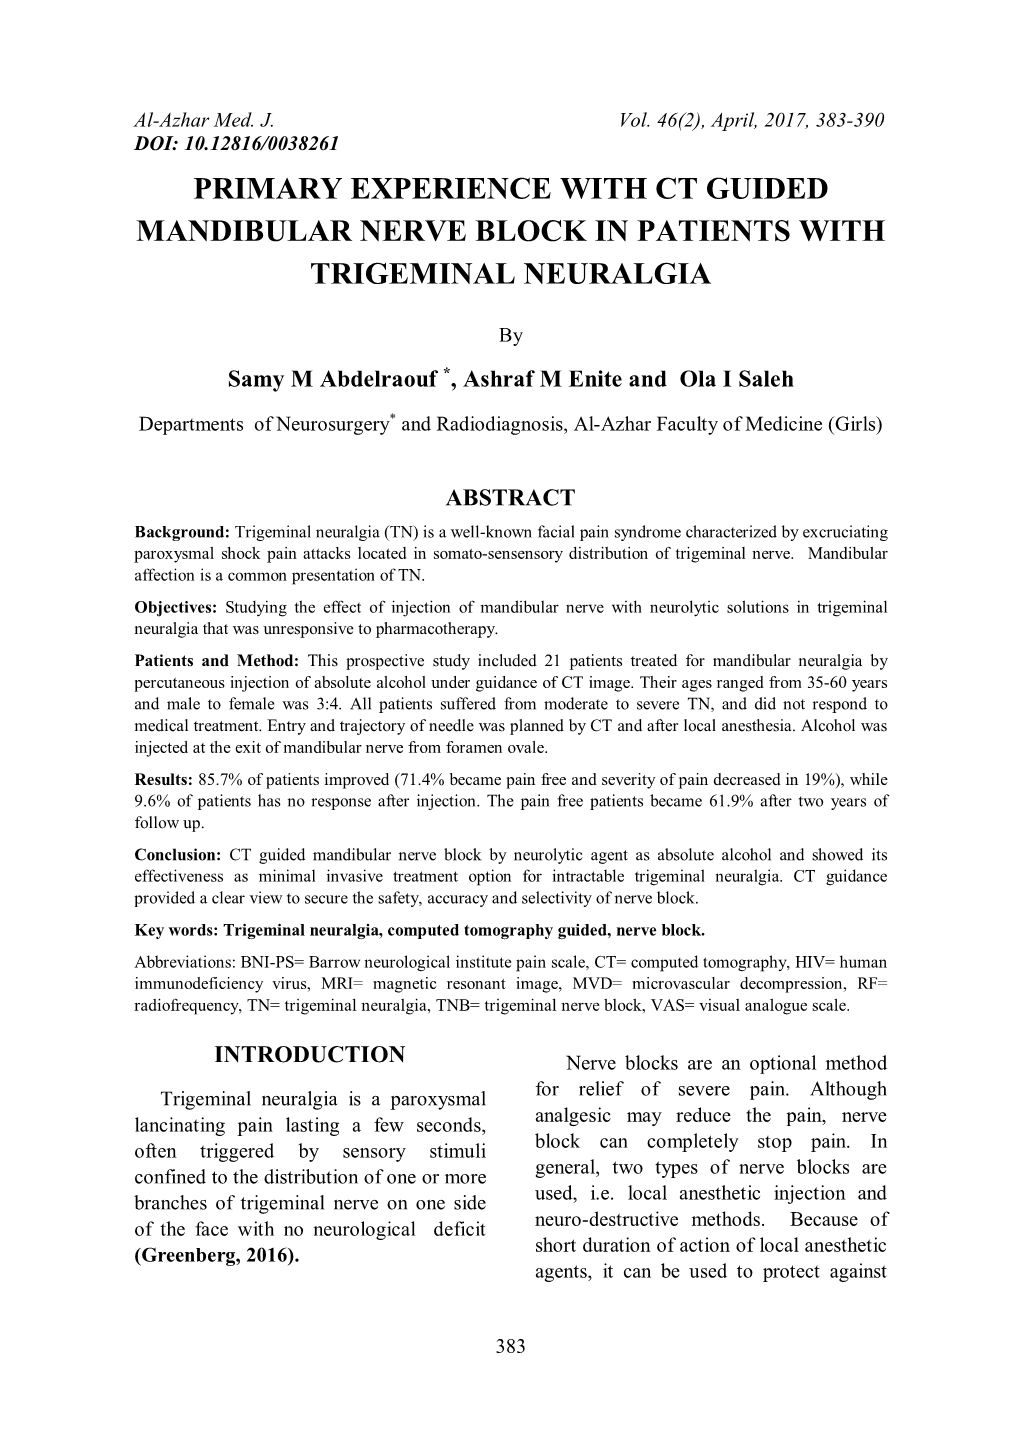 Primary Experience with Ct Guided Mandibular Nerve Block in Patients with Trigeminal Neuralgia